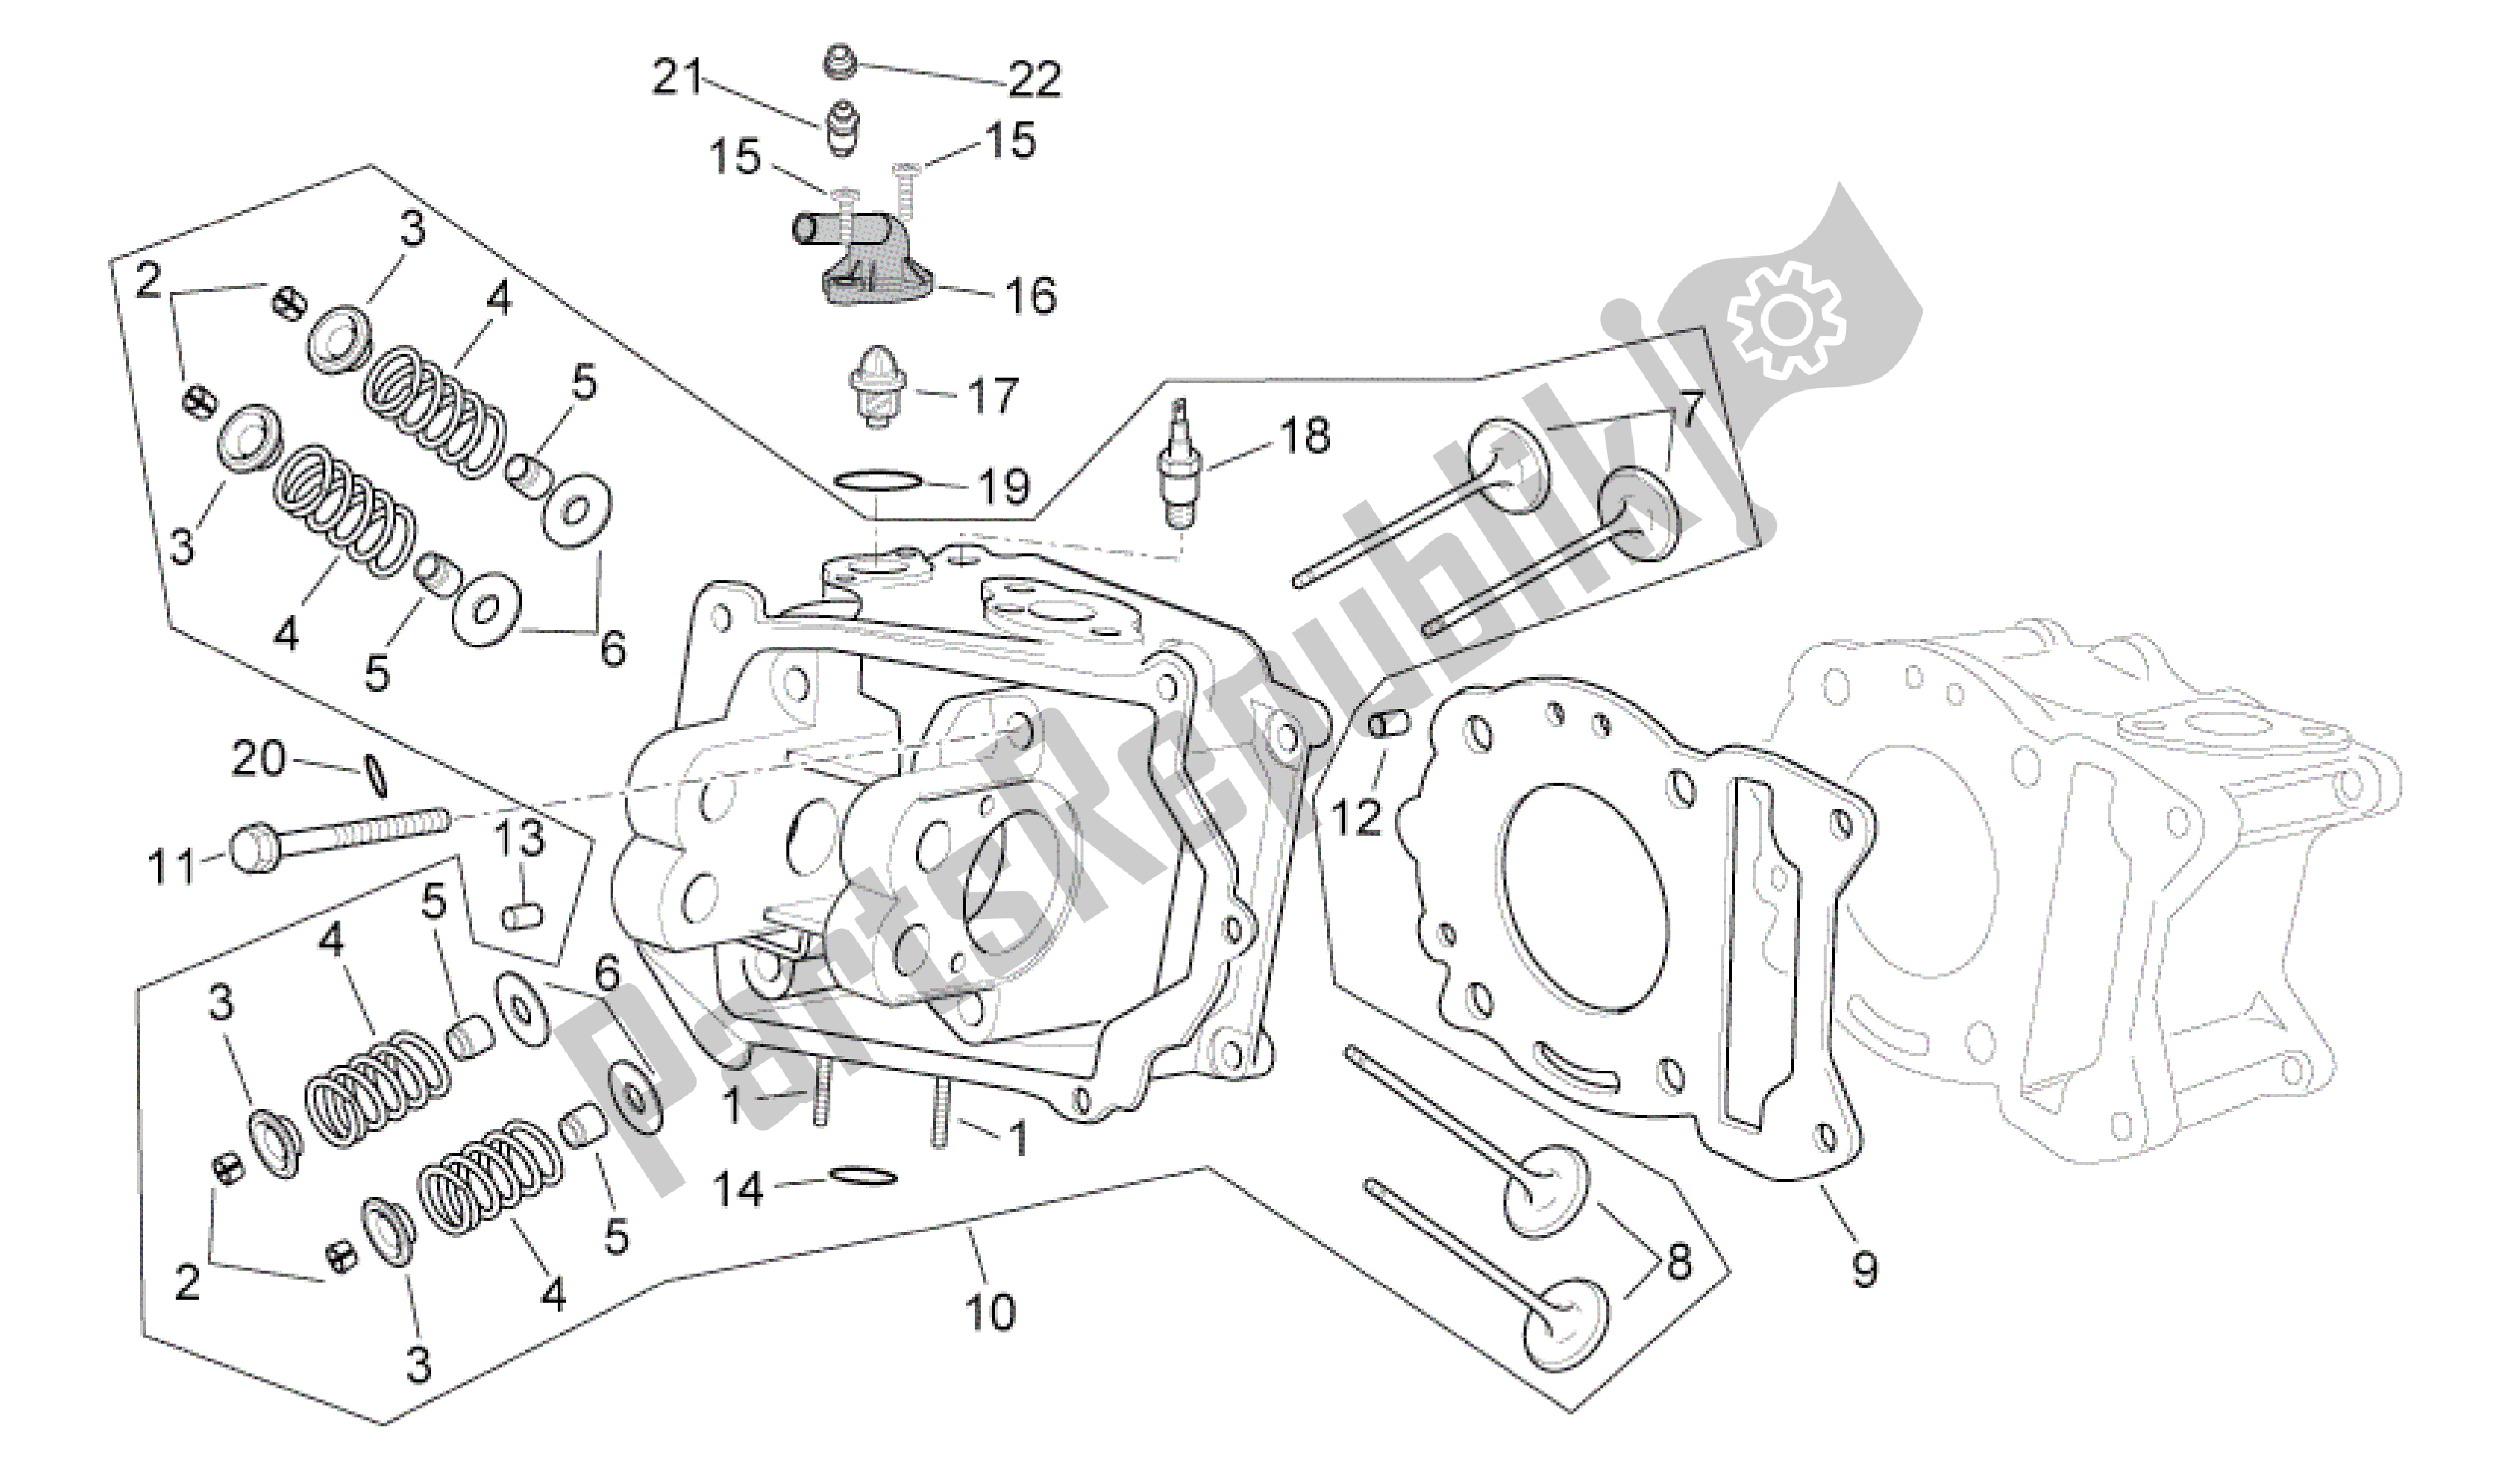 All parts for the Cylinder Head of the Aprilia Sport City 250 2008 - 2010